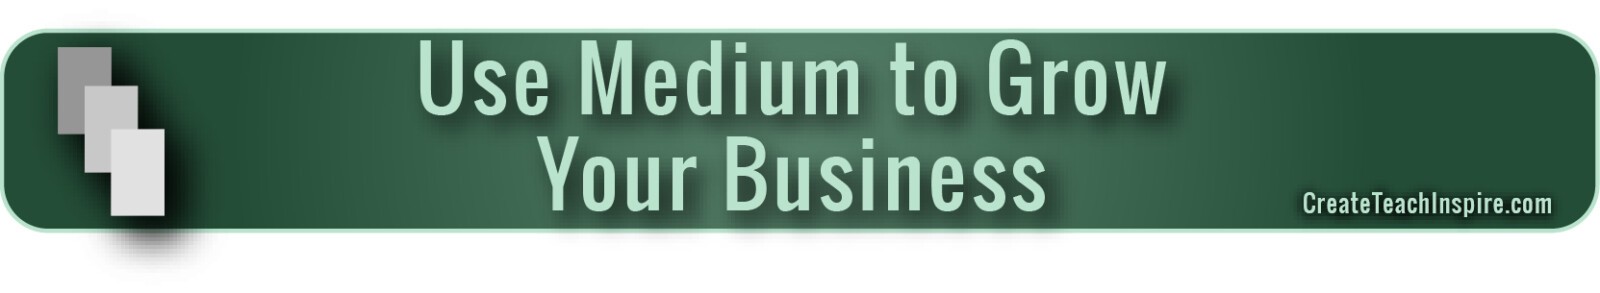 Use Medium to Grow Your Business